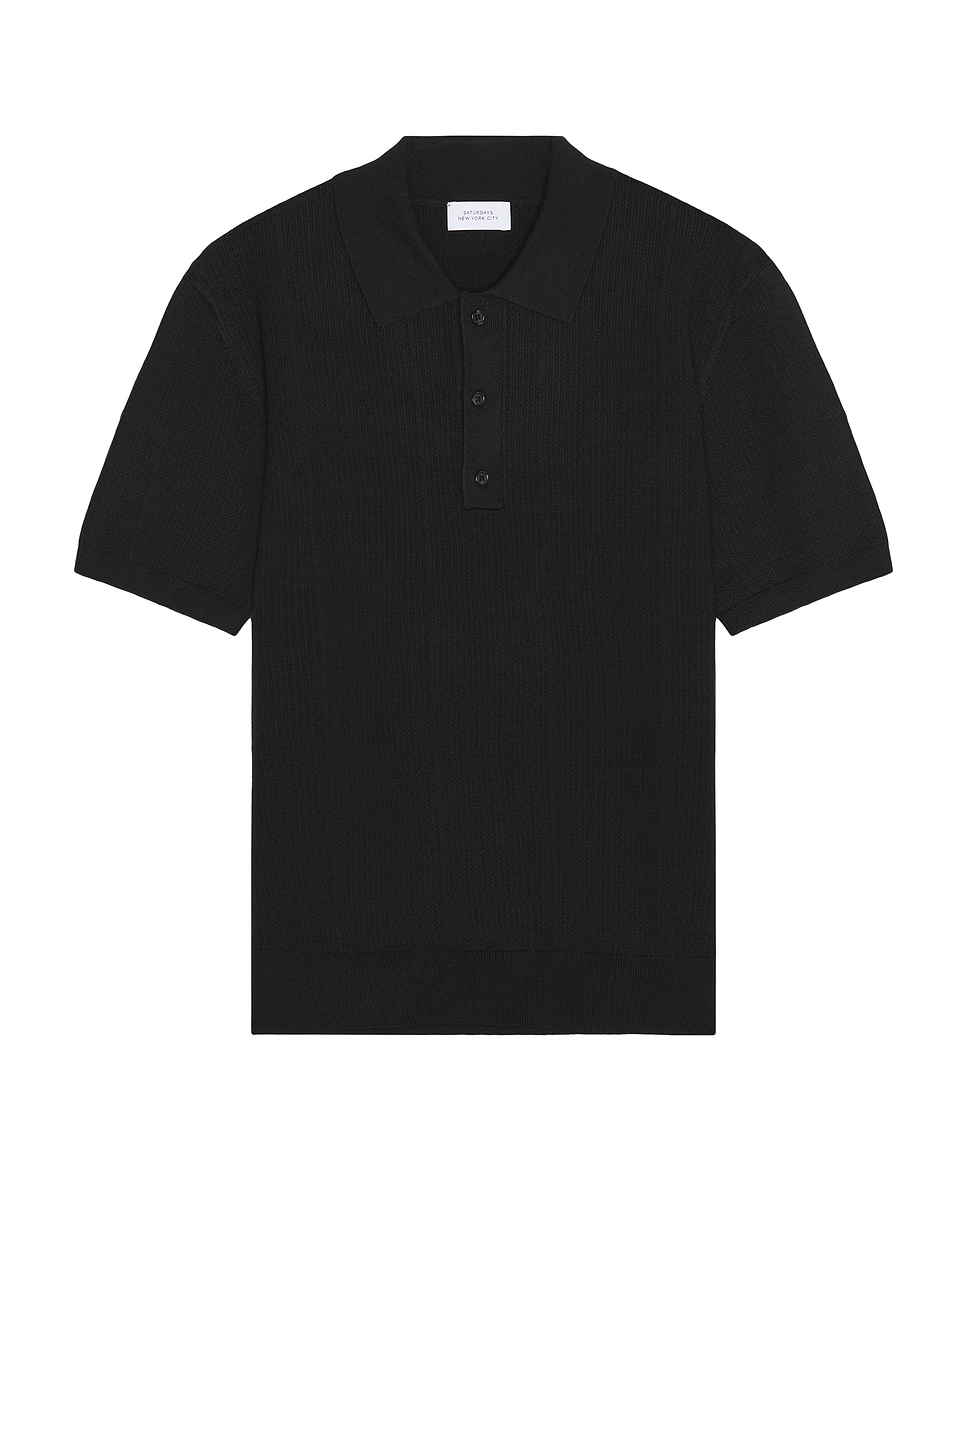 Image 1 of SATURDAYS NYC Jahmad Knit Polo in Black